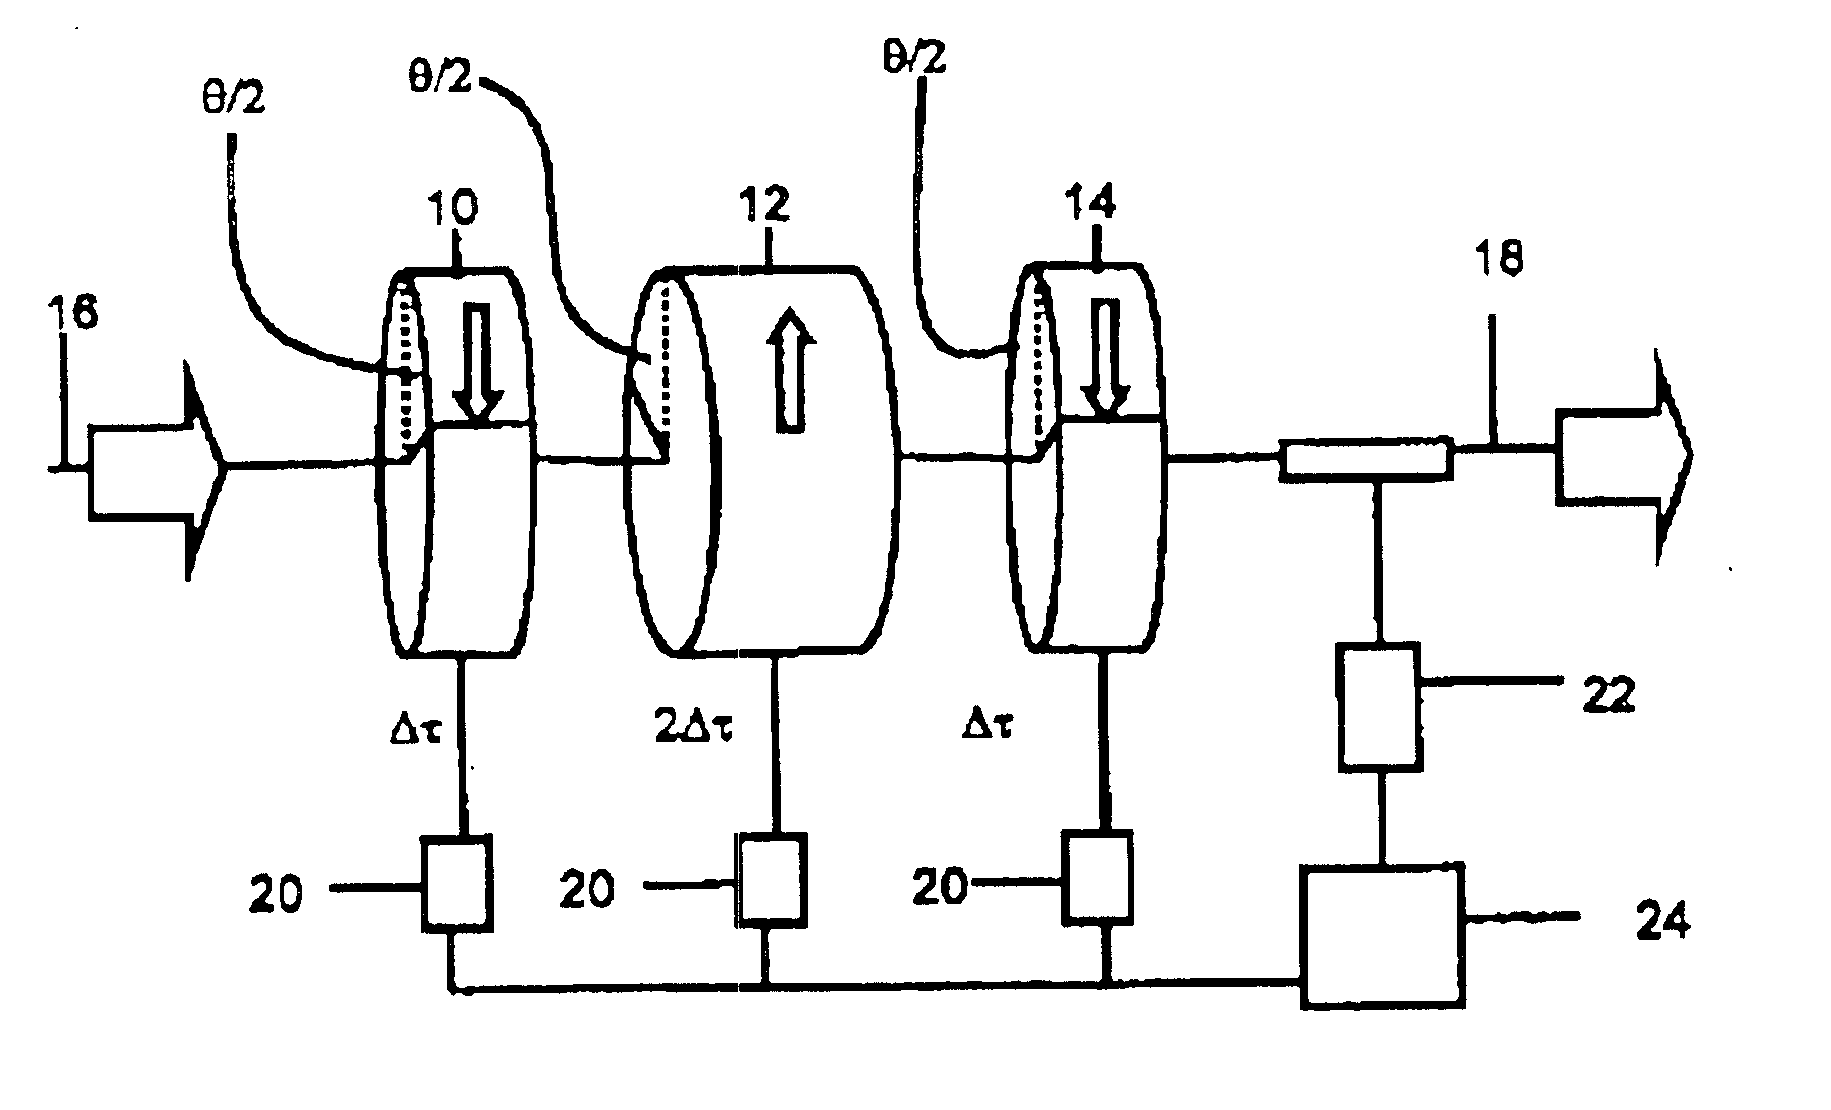 Generation of variable differential group delay